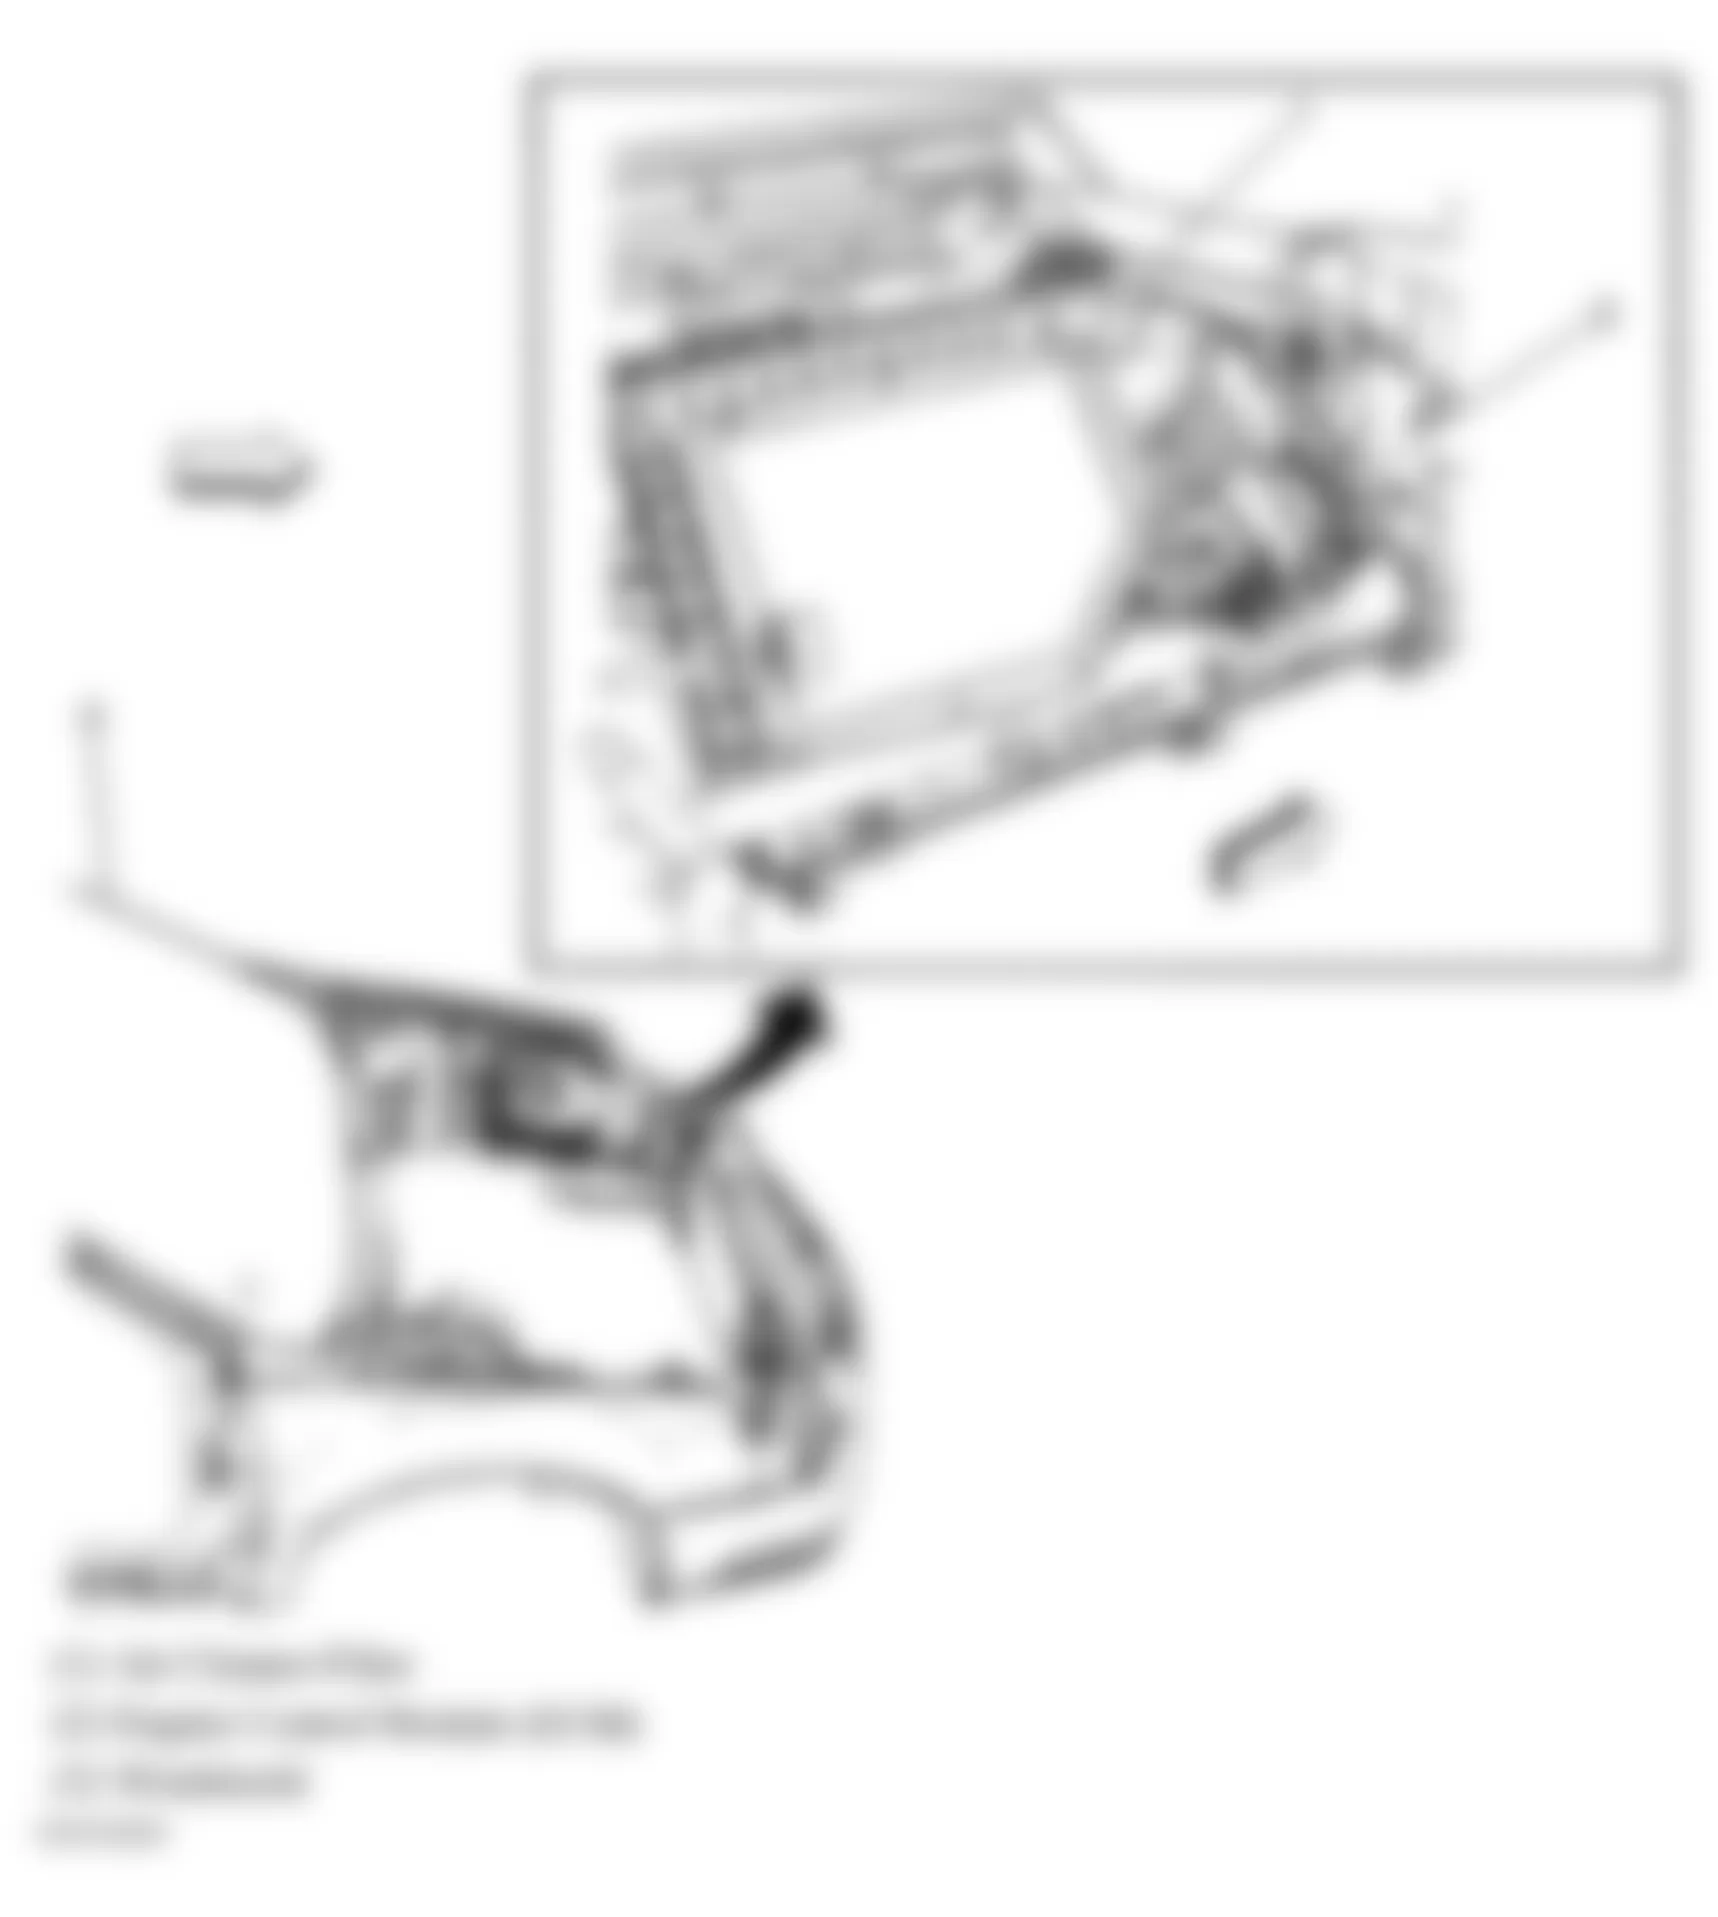 Buick Lucerne CXL 2008 - Component Locations -  Engine Compartment